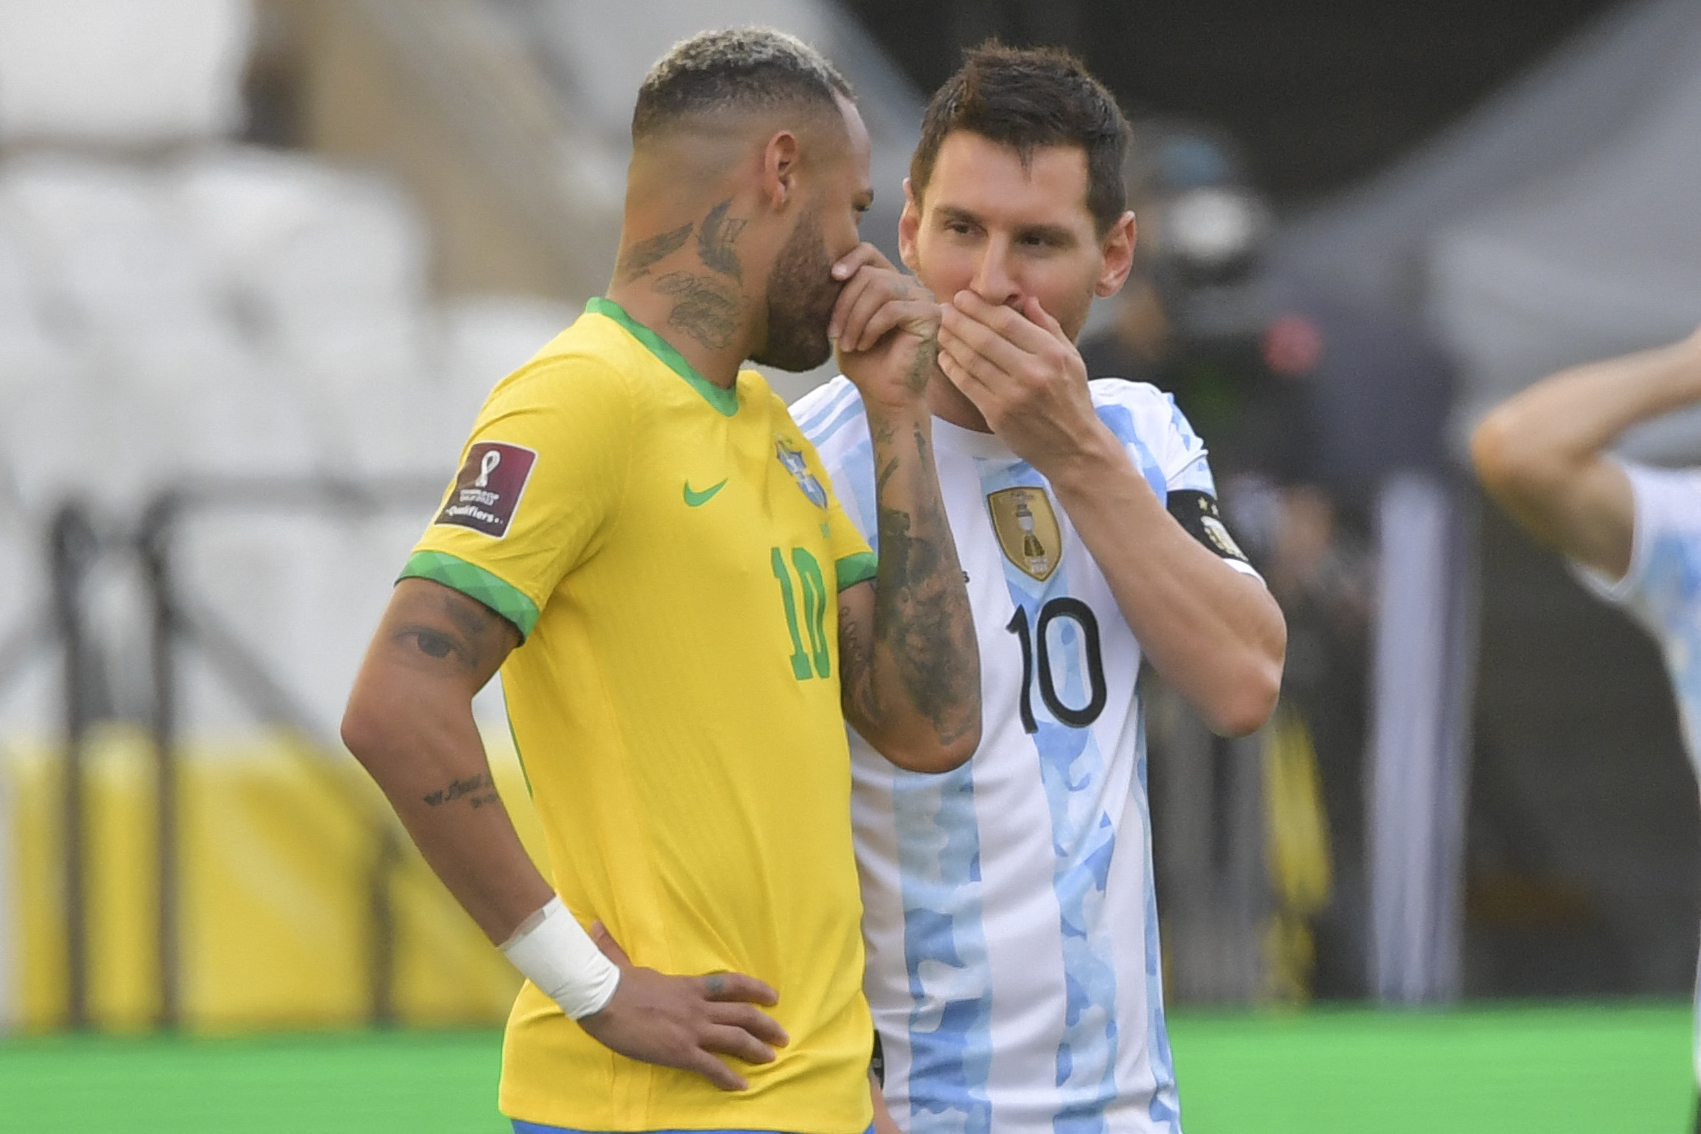 TOPSHOT - Brazil's Neymar (L) and Argentina's Lionel Messi talk before their South American qualification football match for the FIFA World Cup Qatar 2022 at the Neo Quimica Arena, also known as Corinthians Arena, in Sao Paulo, Brazil, on September 5, 2021. (Photo by NELSON ALMEIDA / AFP) (Photo by NELSON ALMEIDA/AFP via Getty Images)